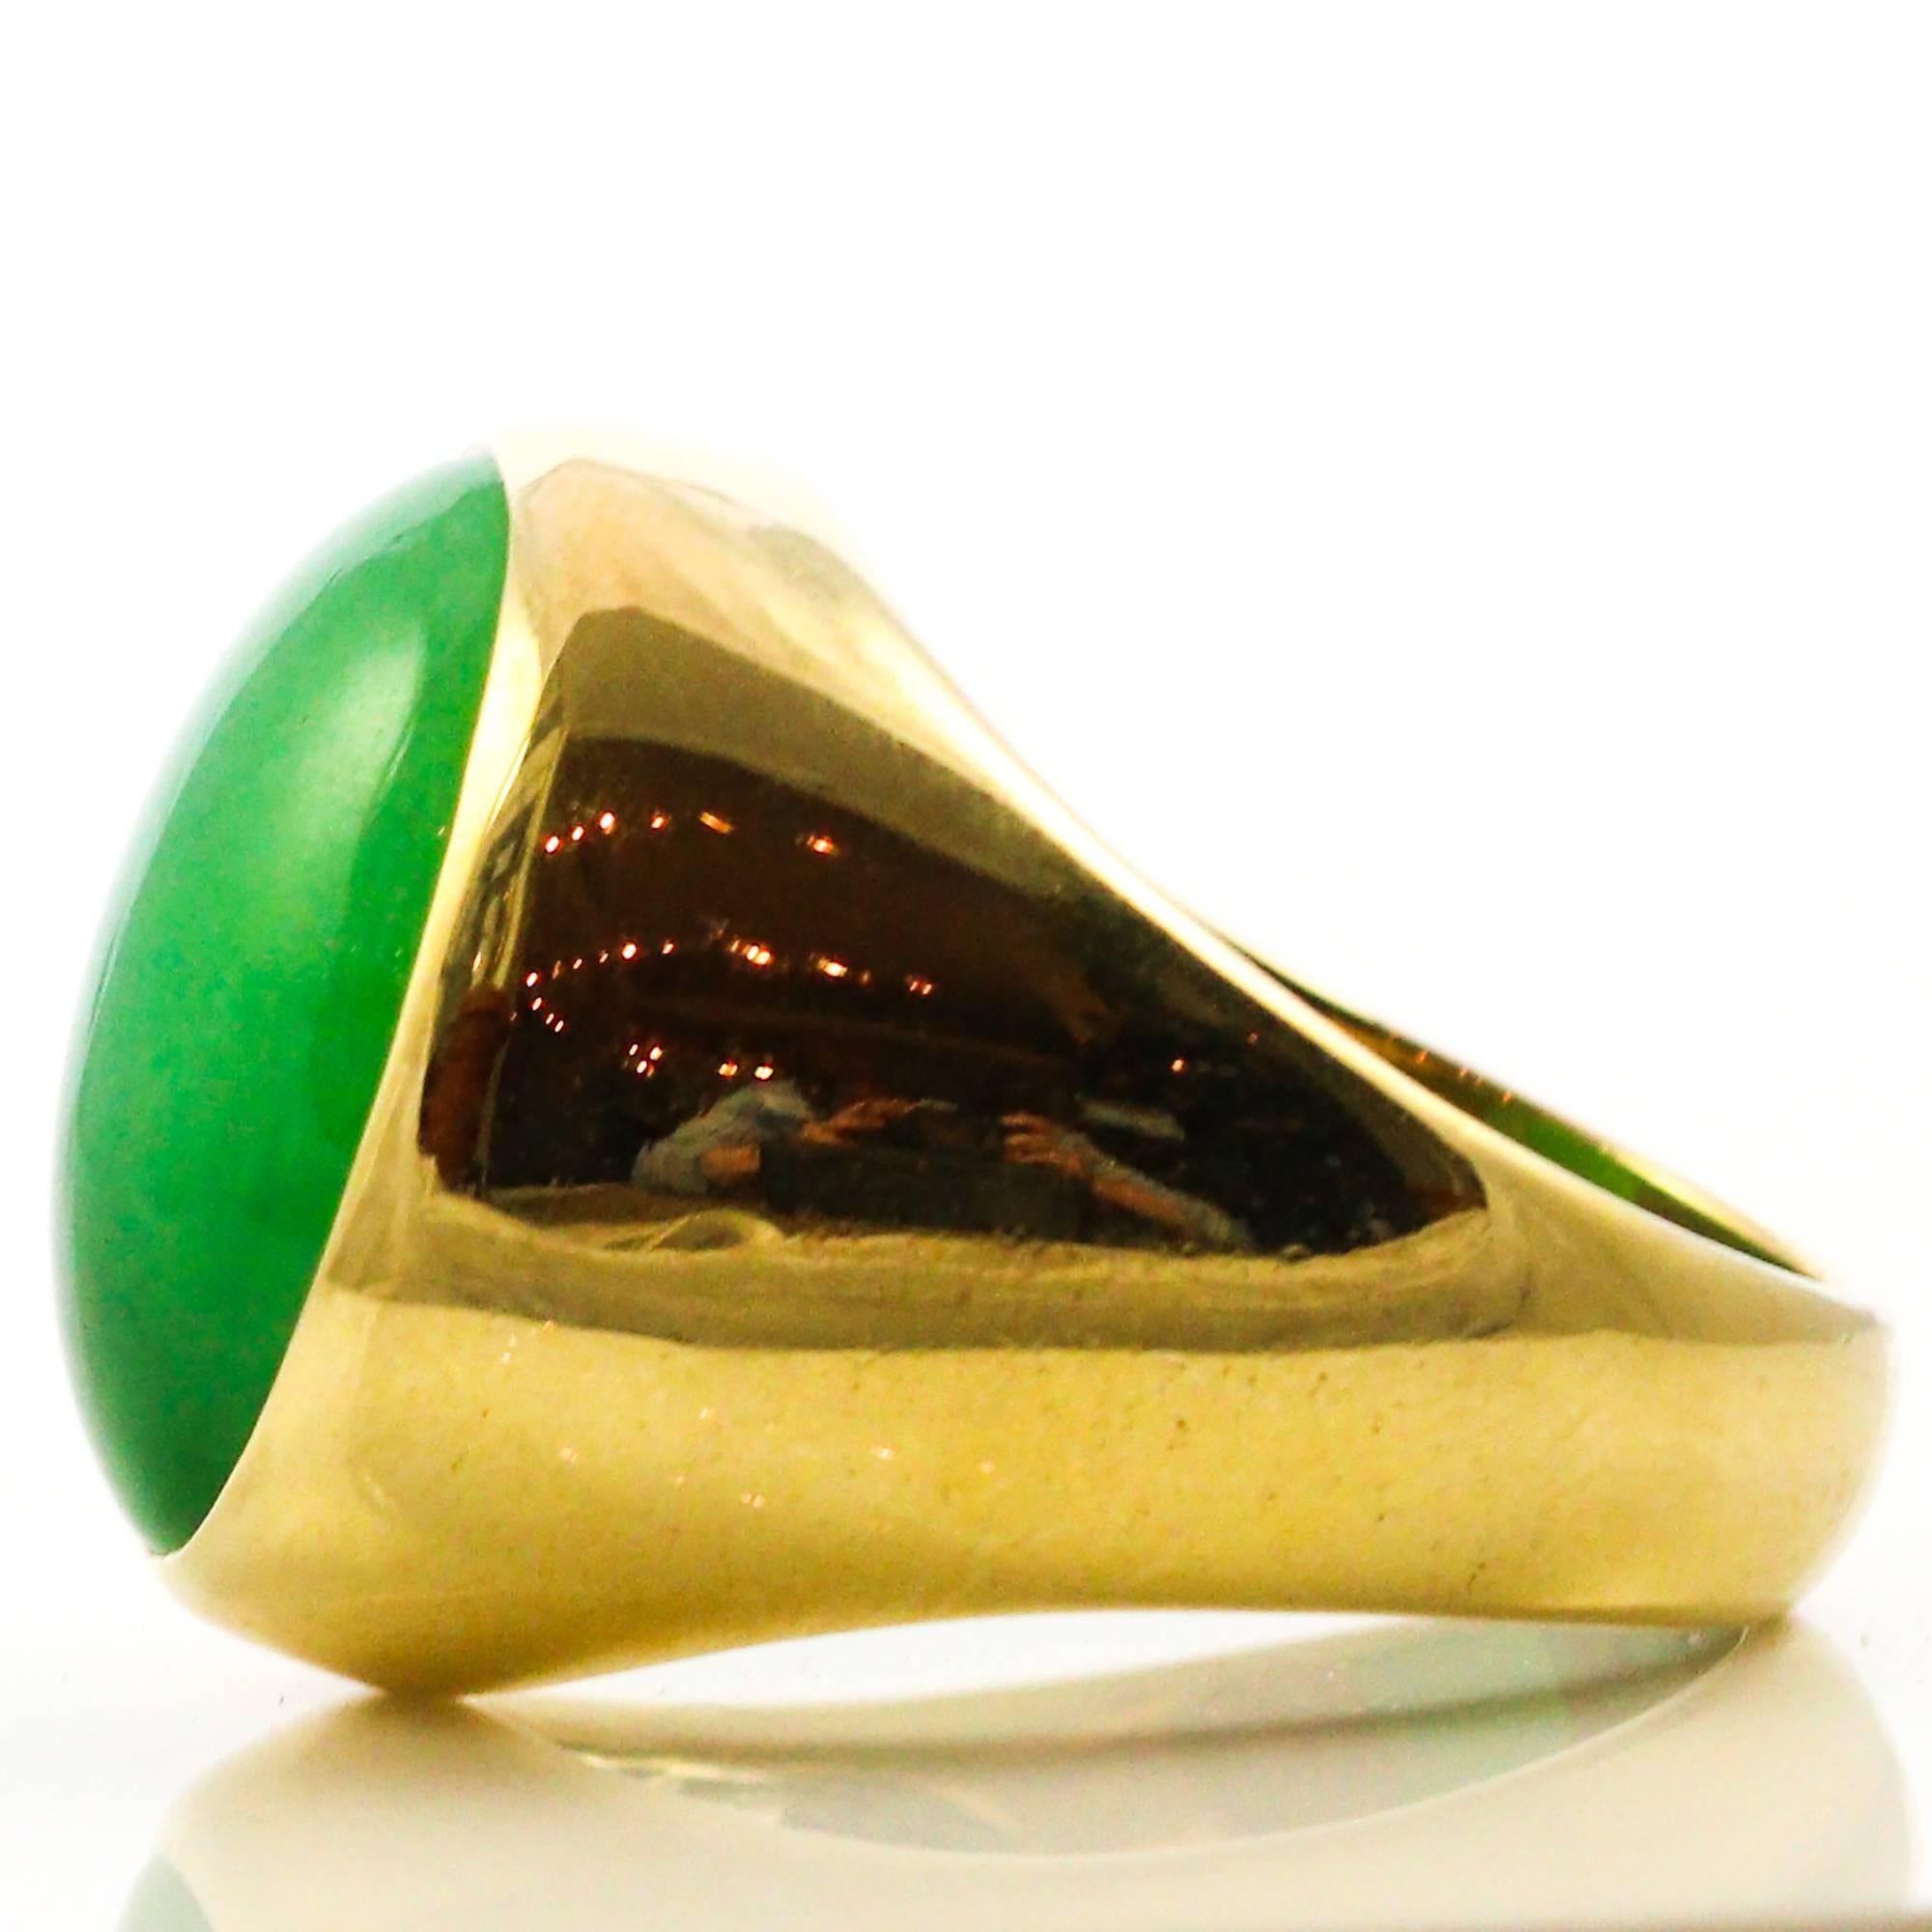 This phenomenal ring centers a 20.15 x 15.45 x 7.00 mm piece of oval cabochon cut jadeite jade set in an 18k yellow gold setting. The piece comes with a report from Mason-Kay Jade Laboratory indicating that the stone is natural grade "A"